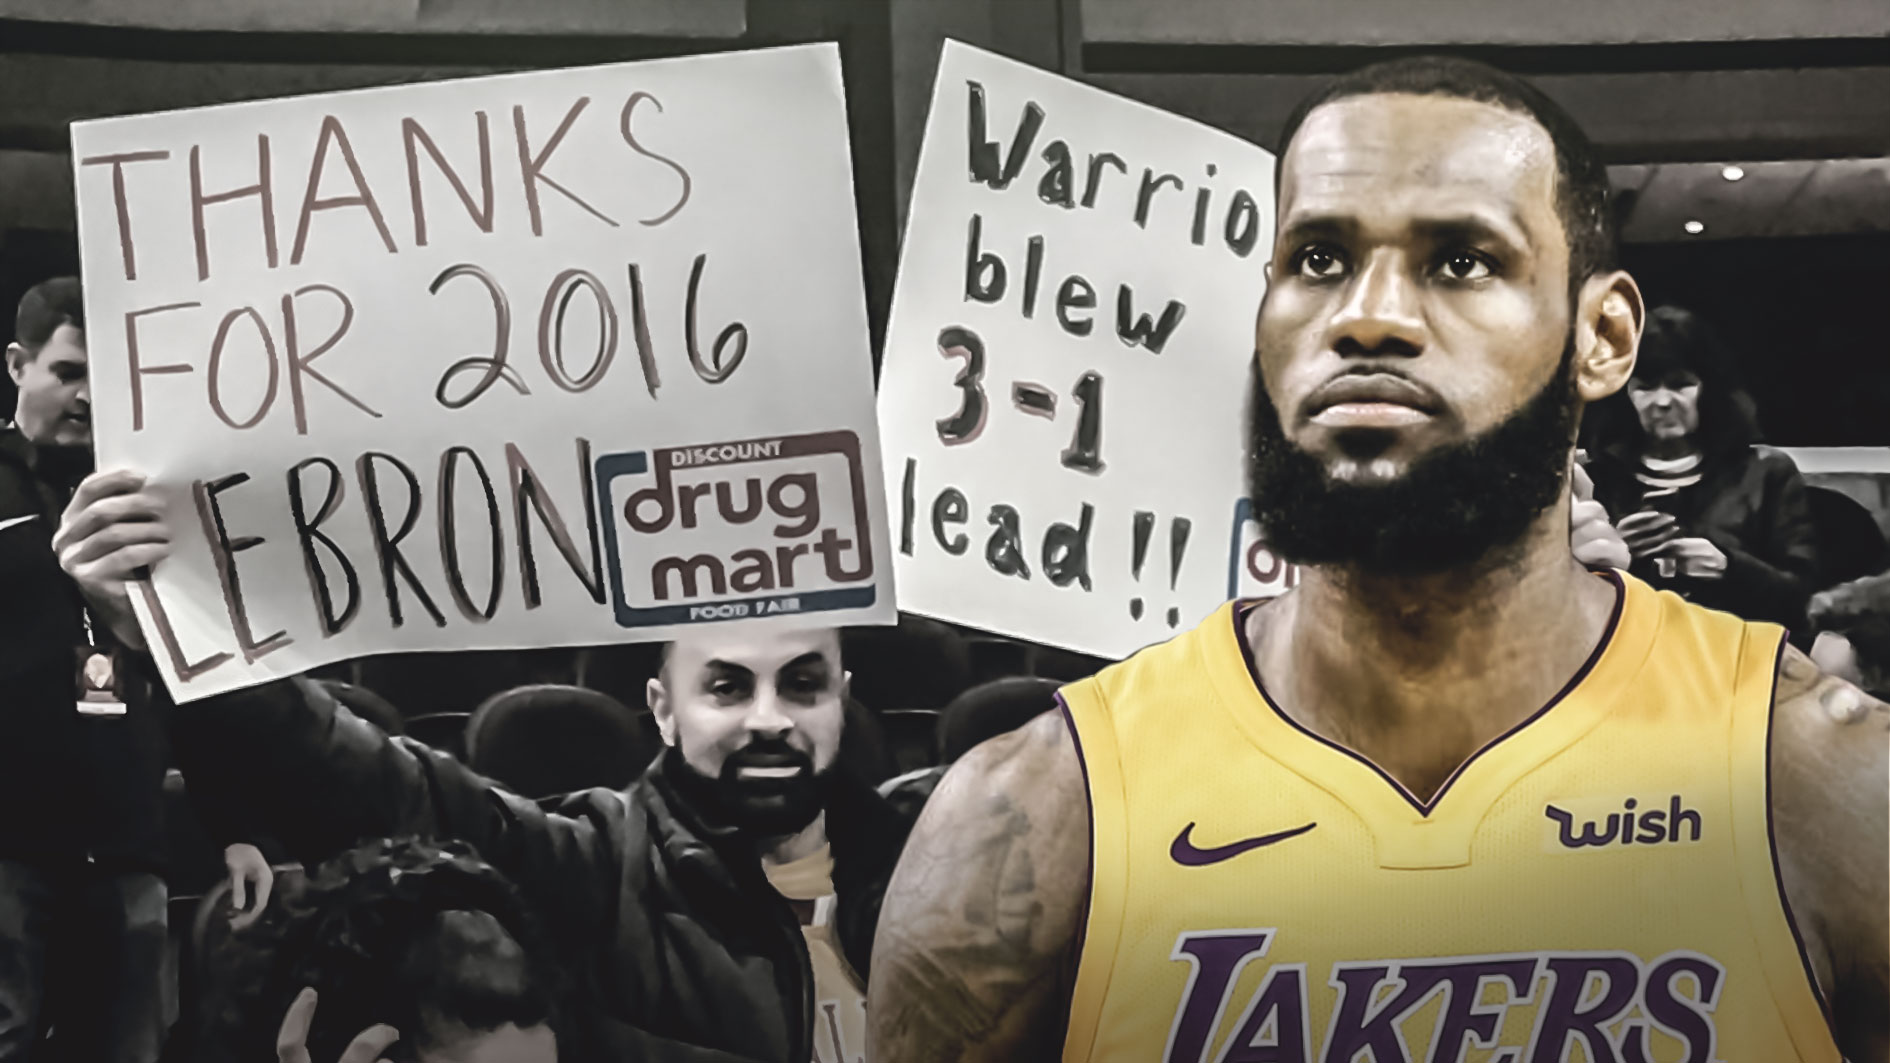 LeBron James is back in Cleveland Wednesday night, so you knew there were going to be some funny signs in the crowd from Cavs fans.